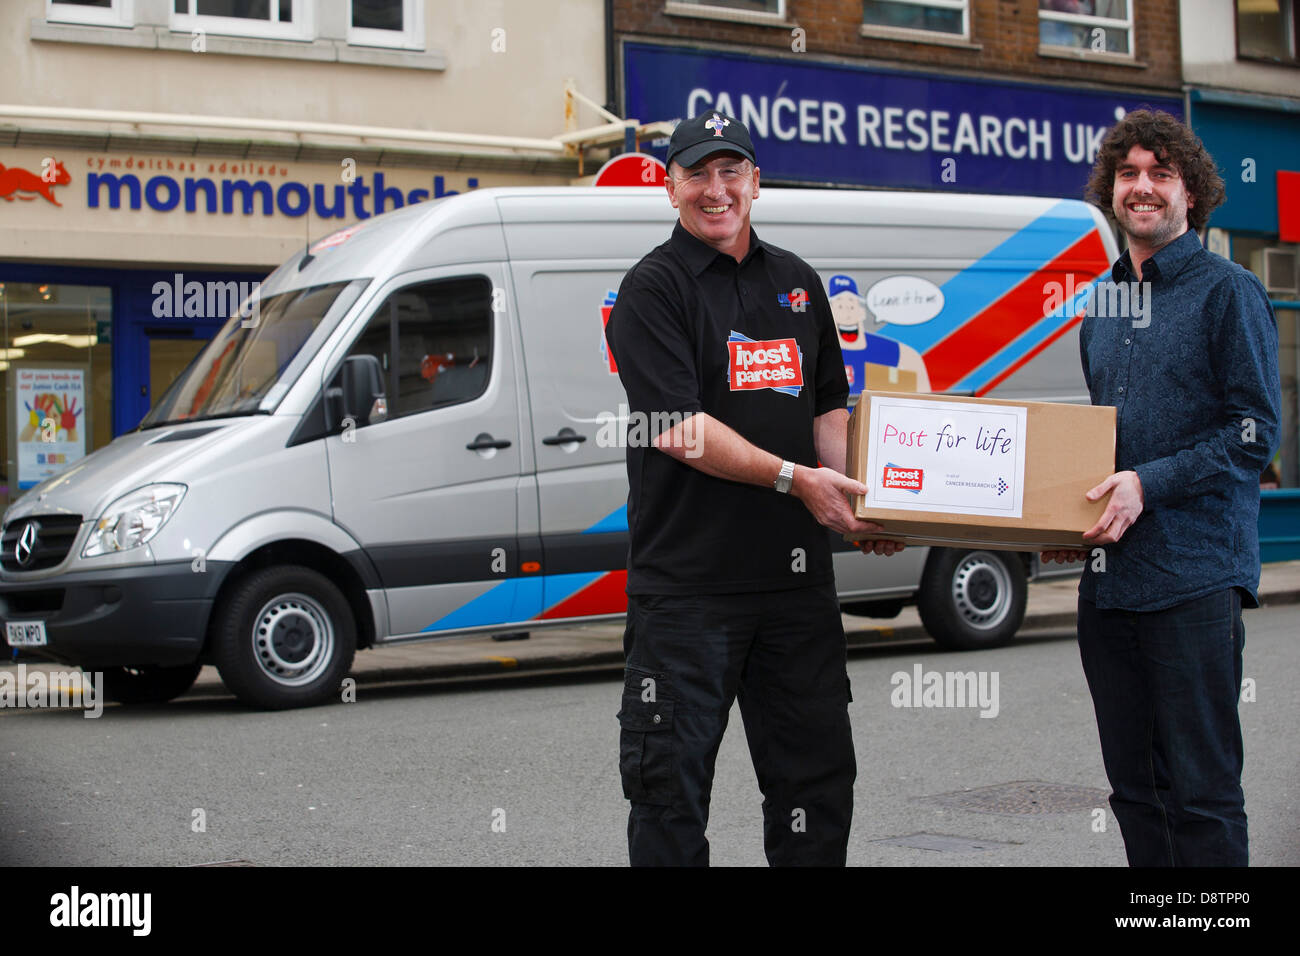 Press shot for the launch of I-Post parcels, Stock Photo